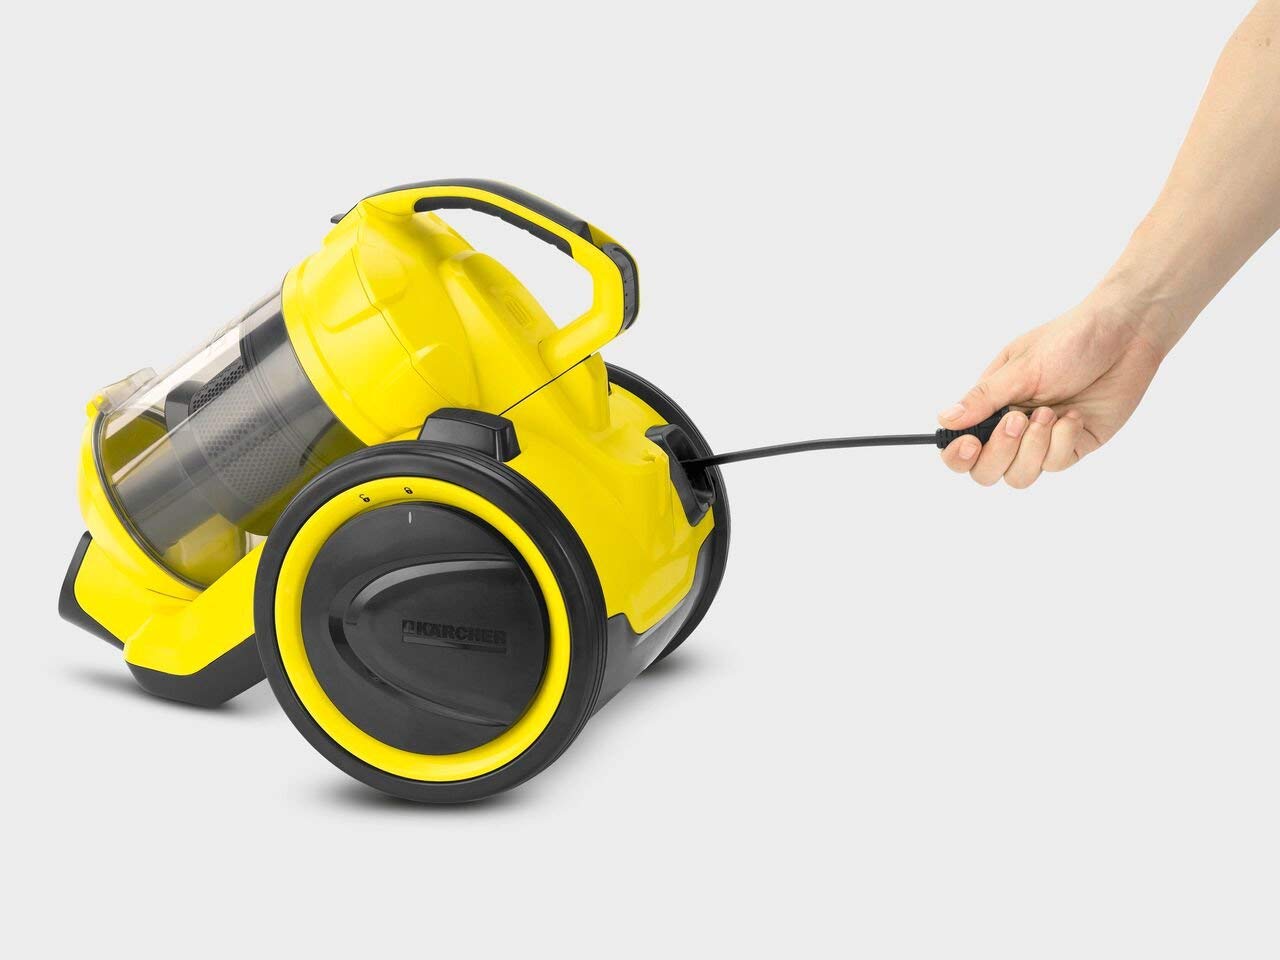 Karcher VC3 Plus Bagless Vacuum Cleaner, Powerful Suction for Home Cleaning, Compact & Lightweight Design, Ideal for Soft & Hard Surfaces, Yellow